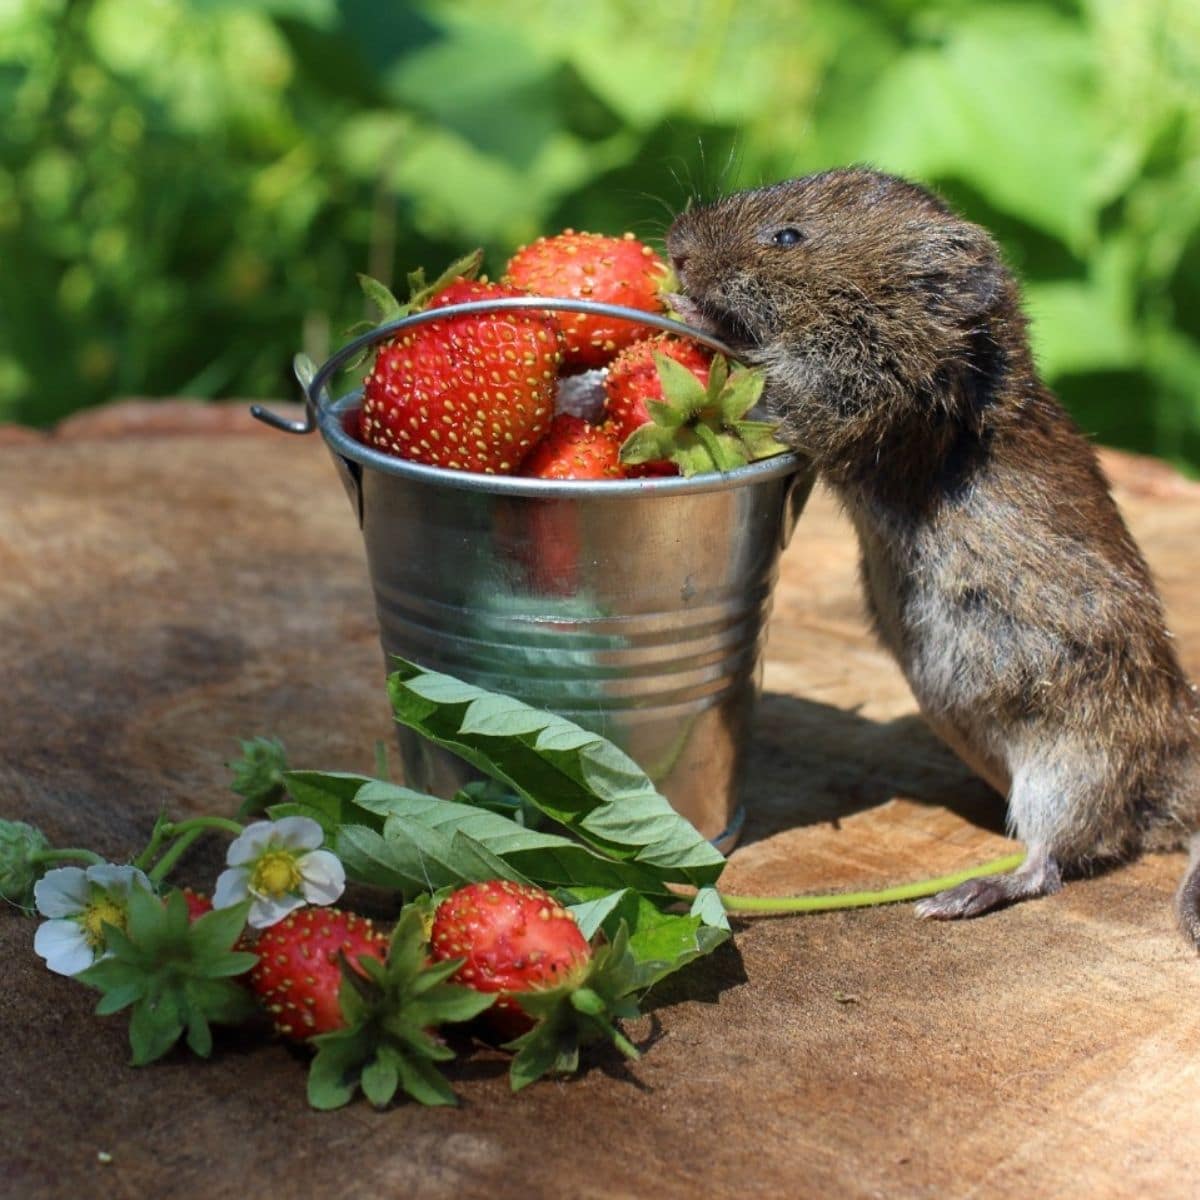 Mouse eating strawberries